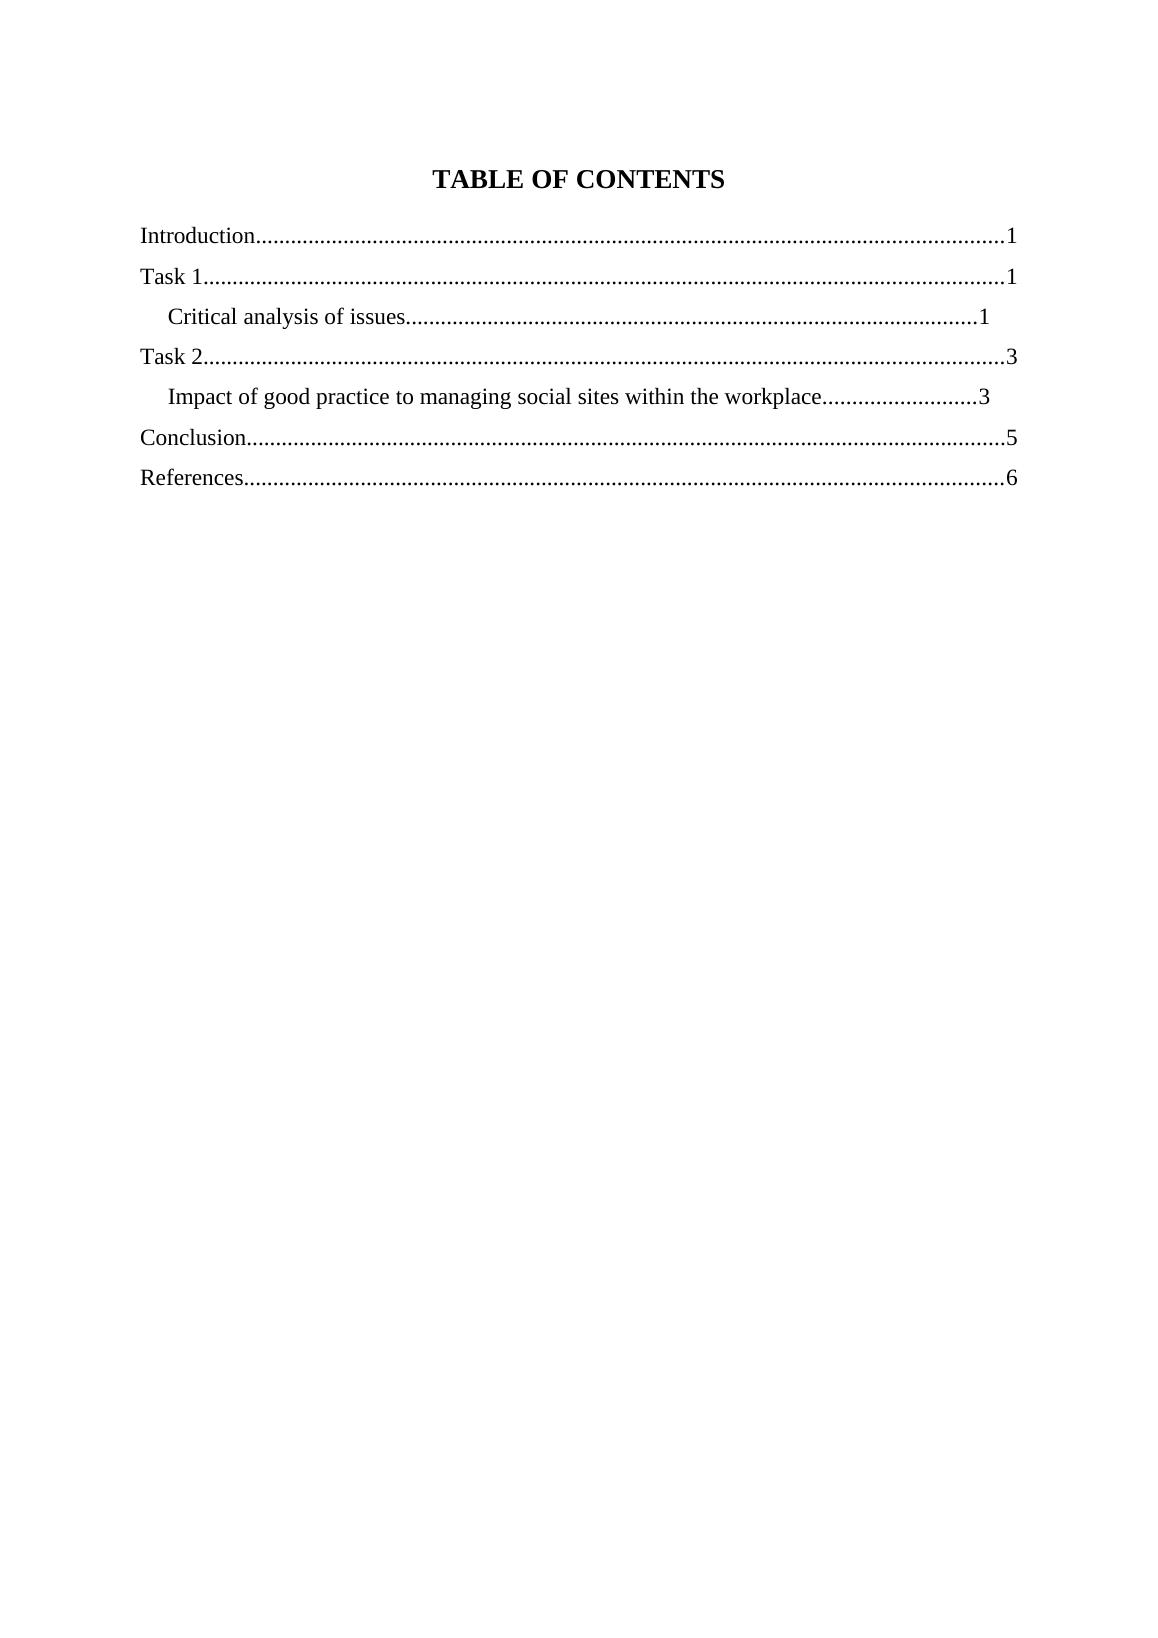 Human Resource Management : Case Study of The Lending Holiday Company_2